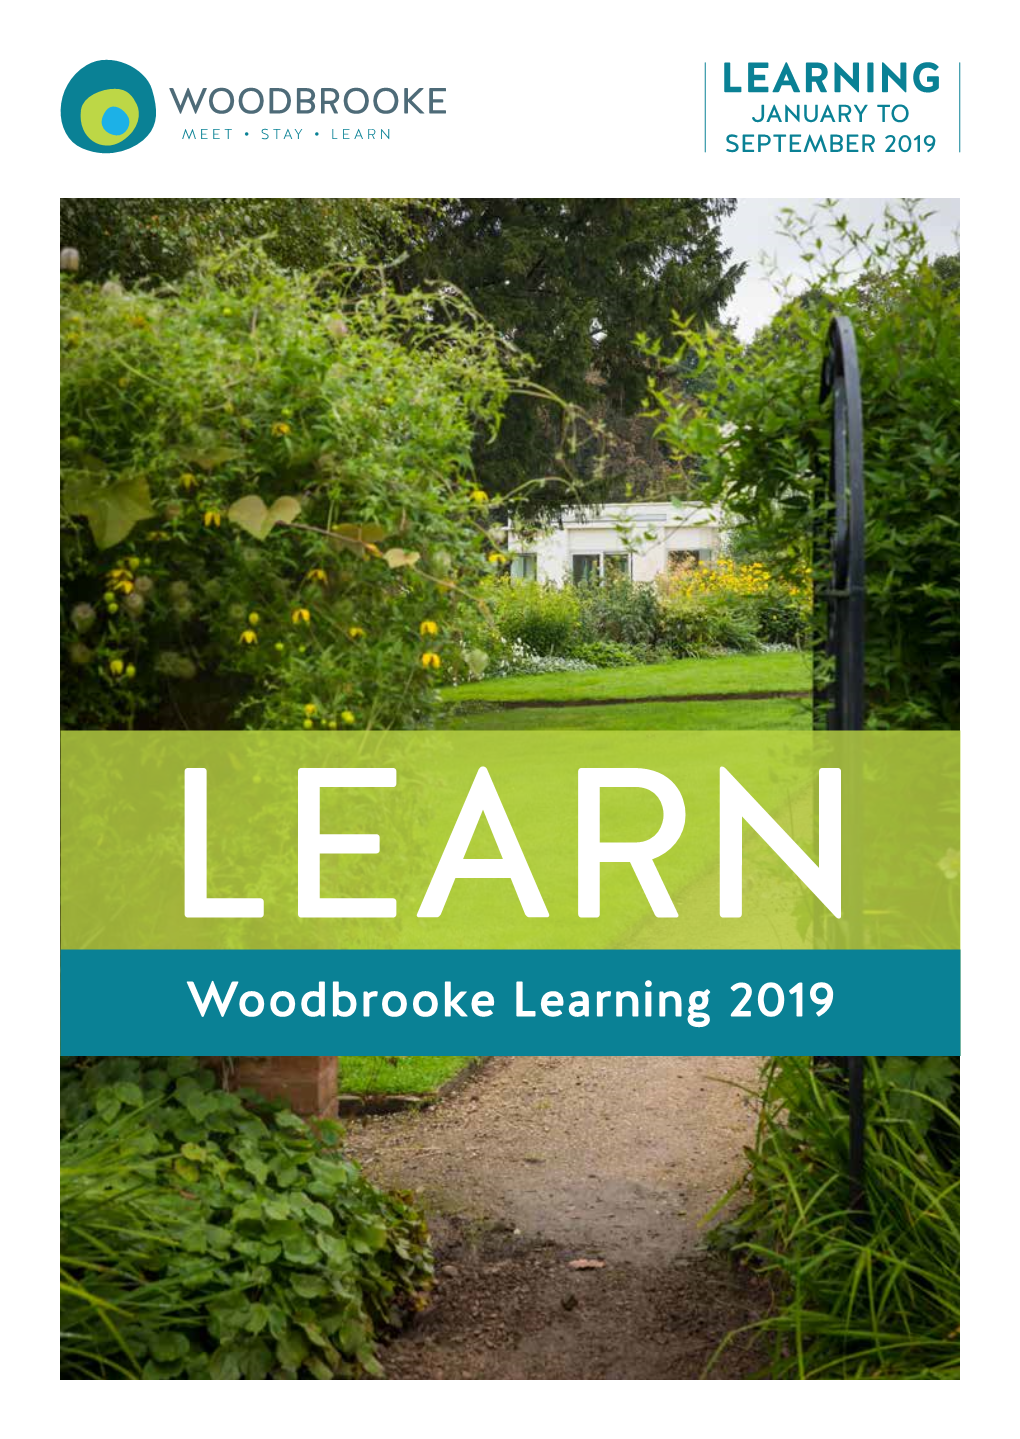 Woodbrooke Learning 2019 Contents